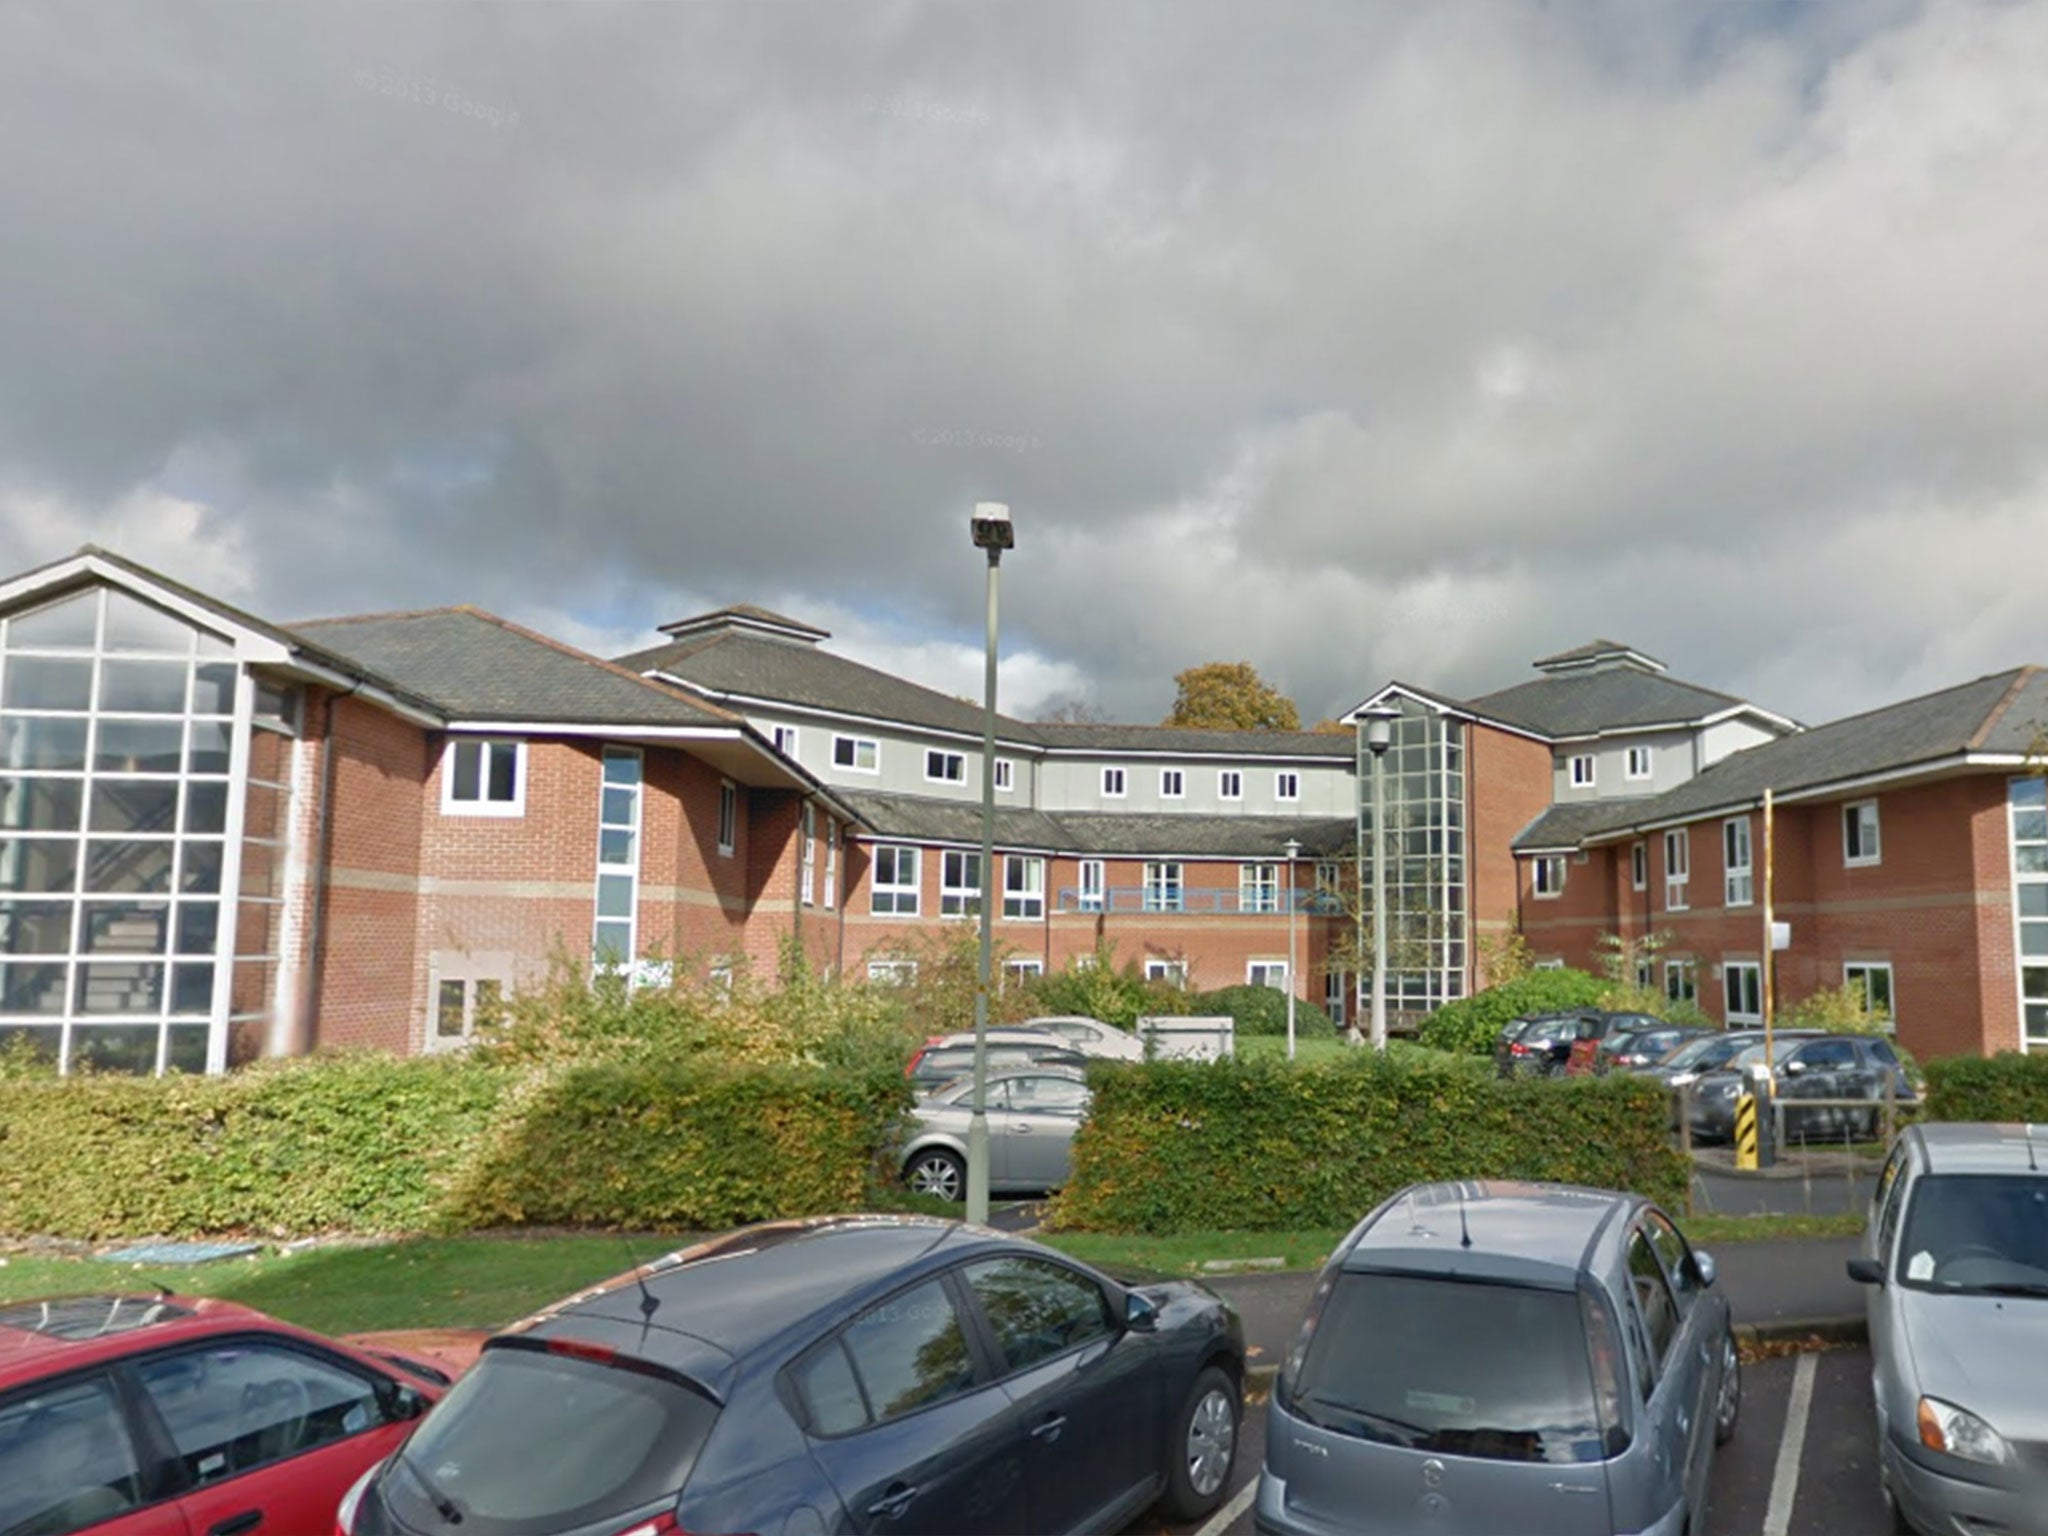 Wotton Lawn hospital where healthcare assistant Sharon Wall was stabbed to death